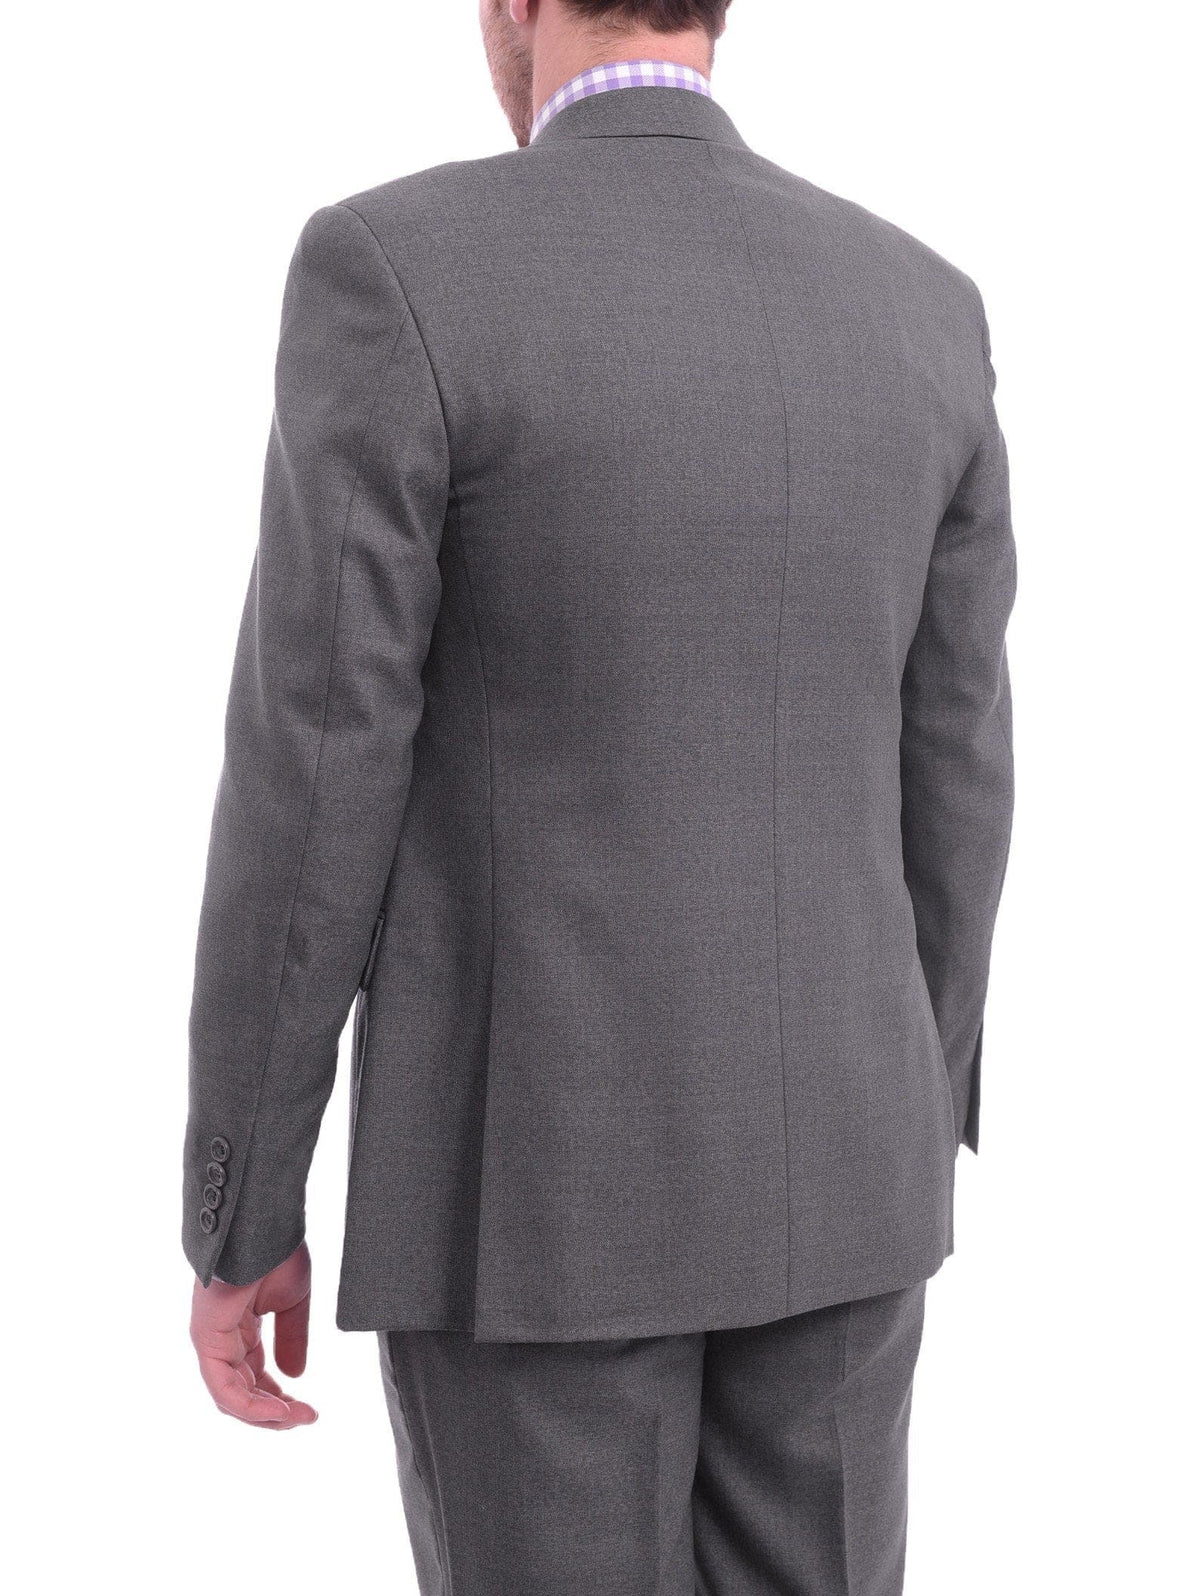 Cianni Cellini TWO PIECE SUITS Cianni Cellini Slim Fit Heather Gray With Blue Windowpane Two Button Wool Suit